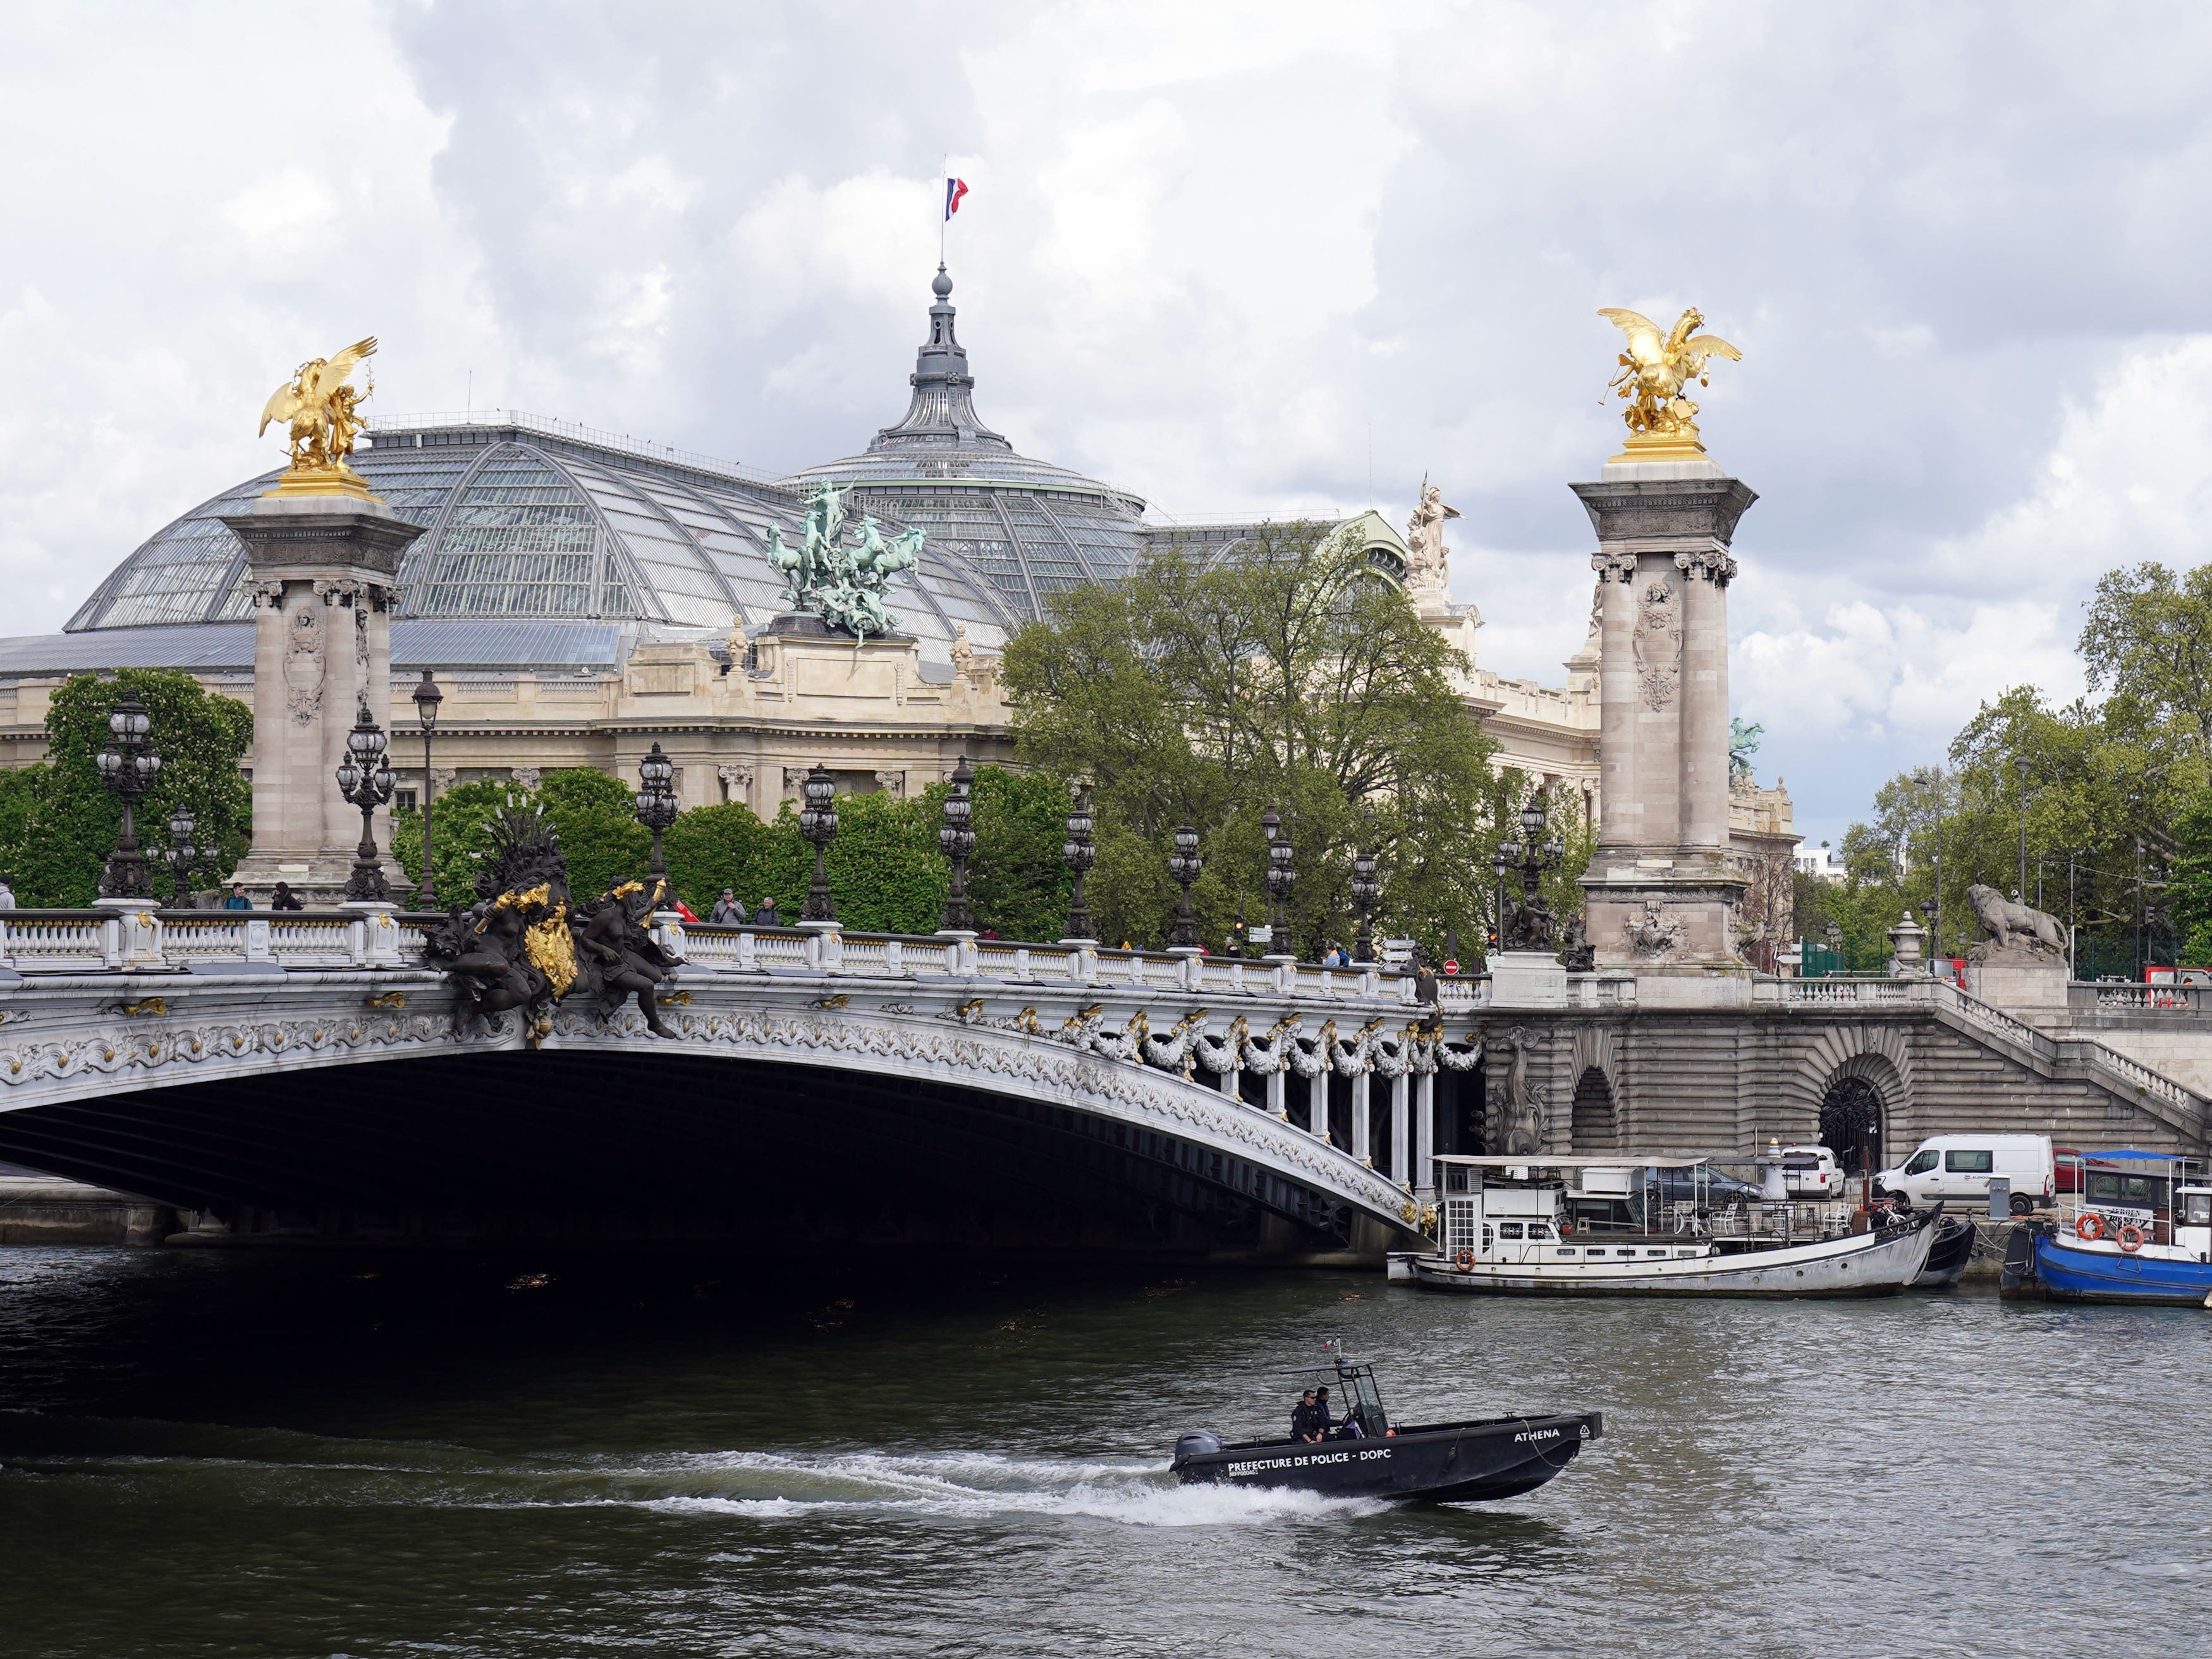 Swimming triathlon training cancelled due to poor water quality in Seine